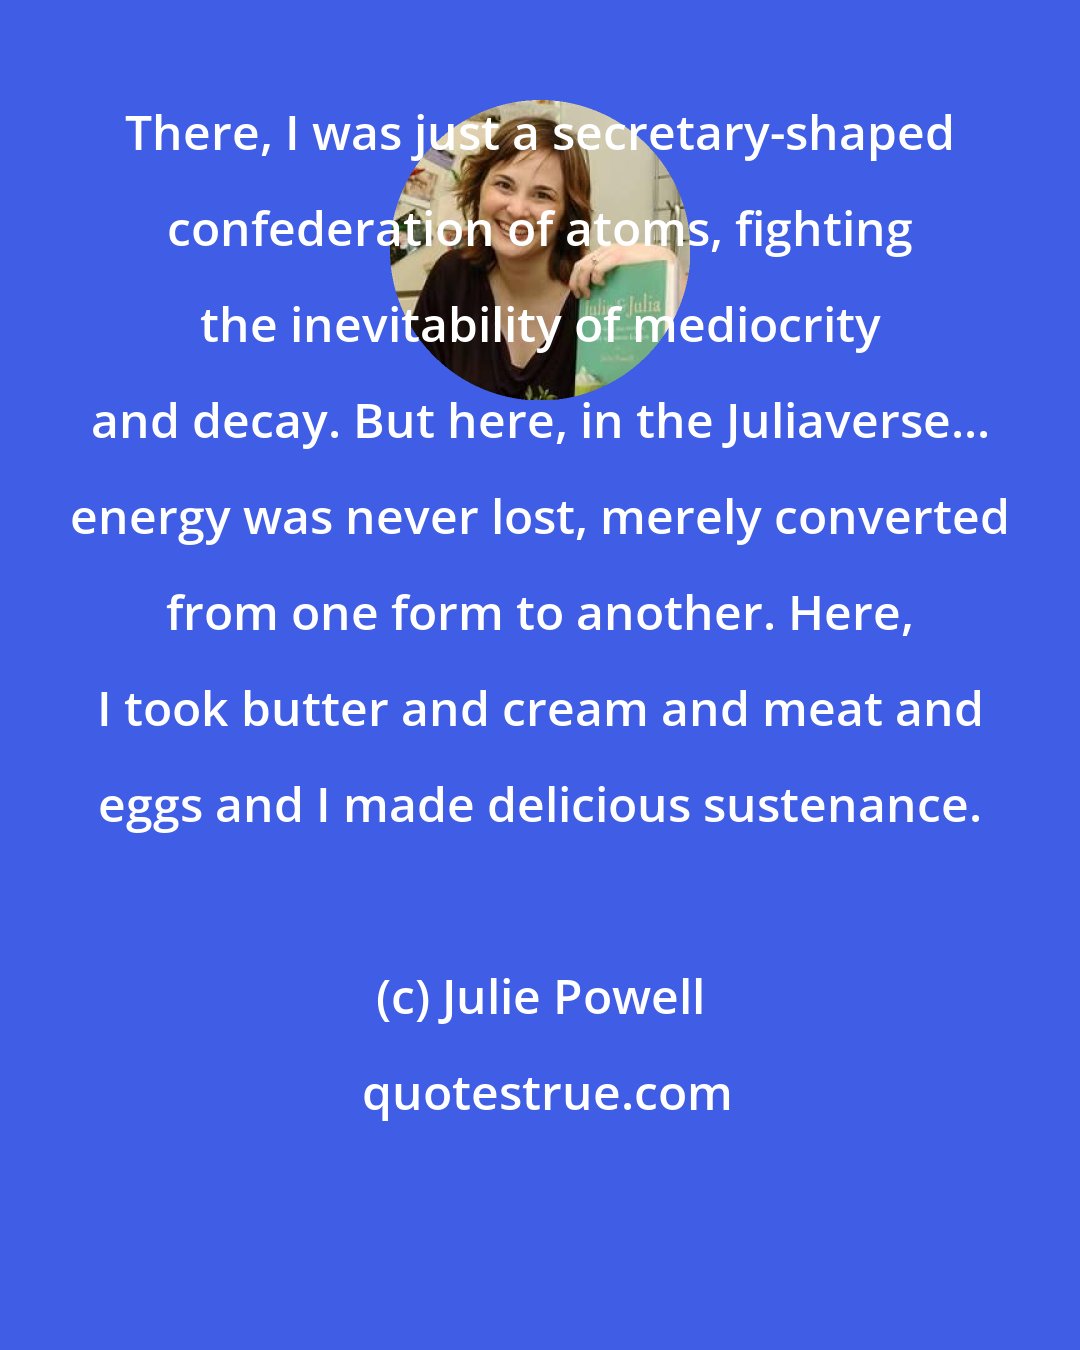 Julie Powell: There, I was just a secretary-shaped confederation of atoms, fighting the inevitability of mediocrity and decay. But here, in the Juliaverse... energy was never lost, merely converted from one form to another. Here, I took butter and cream and meat and eggs and I made delicious sustenance.